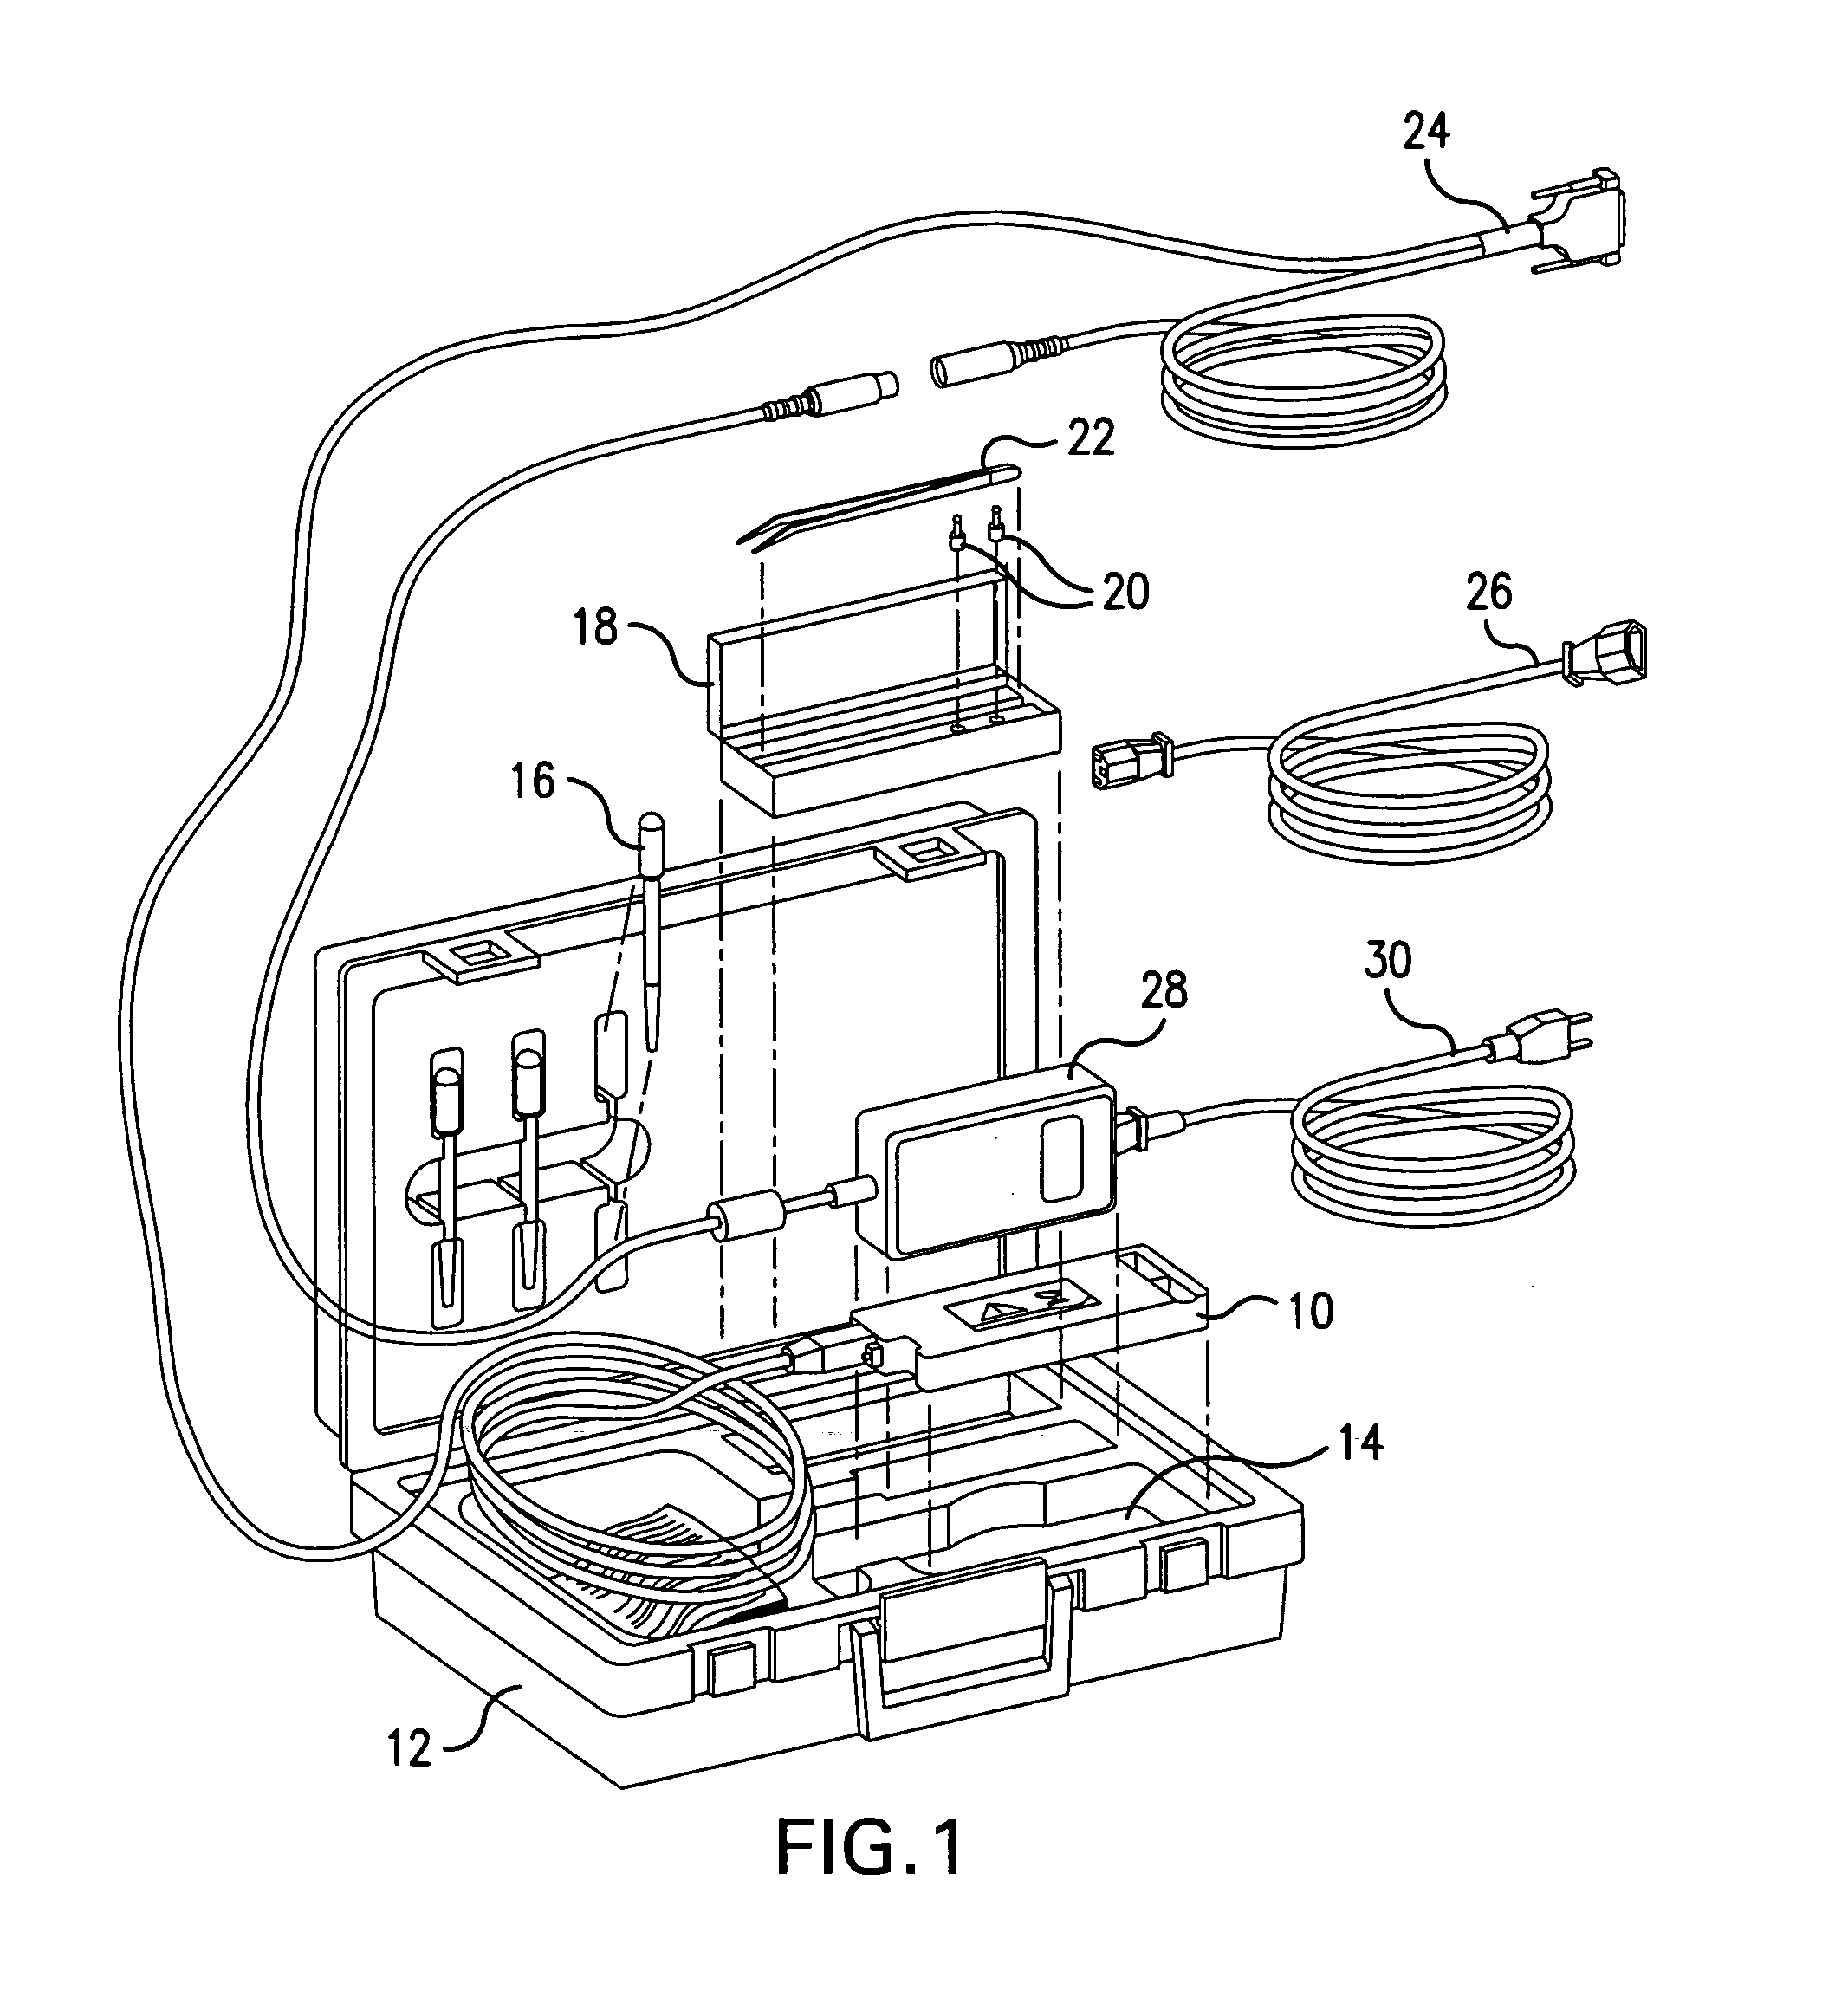 Apparatus and method for verifying the volume of liquid dispensed by a liquid-dispensing mechanism